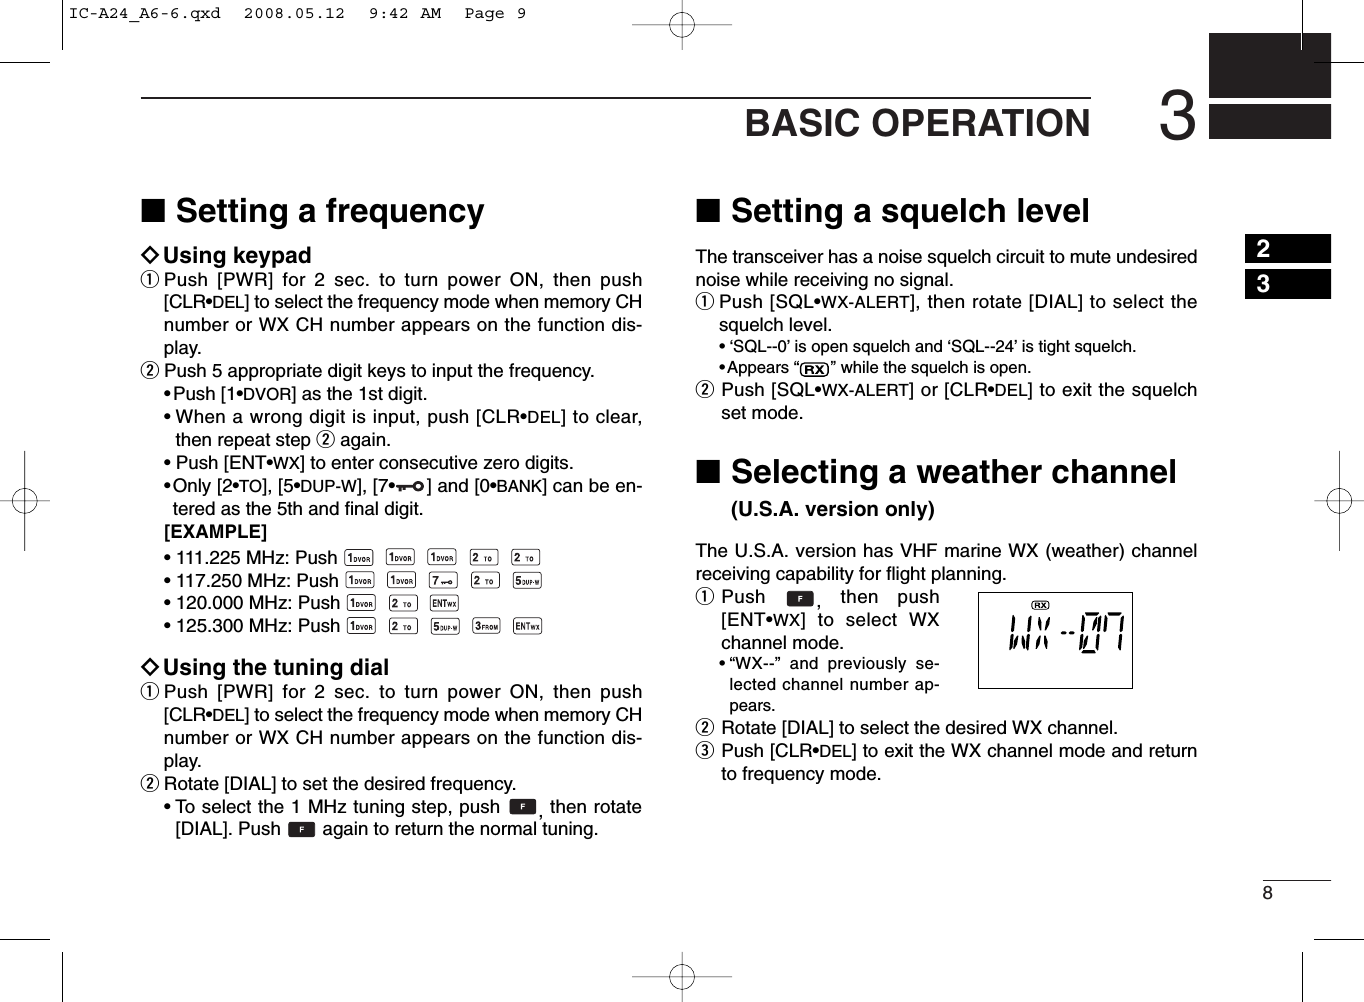 83BASIC OPERATION■Setting a frequencyïUsing keypadqPush [PWR] for 2 sec. to turn power ON, then push[CLR•DEL] to select the frequency mode when memory CHnumber or WX CH number appears on the function dis-play.wPush 5 appropriate digit keys to input the frequency.•Push [1•DVOR] as the 1st digit.• When a wrong digit is input, push [CLR•DEL] to clear,then repeat step wagain.•Push [ENT•WX] to enter consecutive zero digits.•Only [2•TO], [5•DUP-W], [7•] and [0•BANK] can be en-tered as the 5th and ﬁnal digit.[EXAMPLE]• 111.225 MHz: Push• 117.250 MHz: Push• 120.000 MHz: Push• 125.300 MHz: PushïUsing the tuning dialqPush [PWR] for 2 sec. to turn power ON, then push[CLR•DEL] to select the frequency mode when memory CHnumber or WX CH number appears on the function dis-play.wRotate [DIAL] to set the desired frequency.• To select the 1 MHz tuning step, push  , then rotate[DIAL]. Push  again to return the normal tuning.■Setting a squelch levelThe transceiver has a noise squelch circuit to mute undesirednoise while receiving no signal.qPush [SQL•WX-ALERT], then rotate [DIAL] to select thesquelch level.• ‘SQL--0’is open squelch and ‘SQL--24’is tight squelch.•Appears “” while the squelch is open.wPush [SQL•WX-ALERT] or [CLR•DEL] to exit the squelchset mode.■Selecting a weather channel (U.S.A. version only)The U.S.A. version has VHF marine WX (weather) channelreceiving capability for ﬂight planning.qPush  ,then push[ENT•WX] to select WXchannel mode.•“WX--” and previously se-lected channel number ap-pears.wRotate [DIAL] to select the desired WX channel.ePush [CLR•DEL] to exit the WX channel mode and returnto frequency mode.23IC-A24_A6-6.qxd  2008.05.12  9:42 AM  Page 9